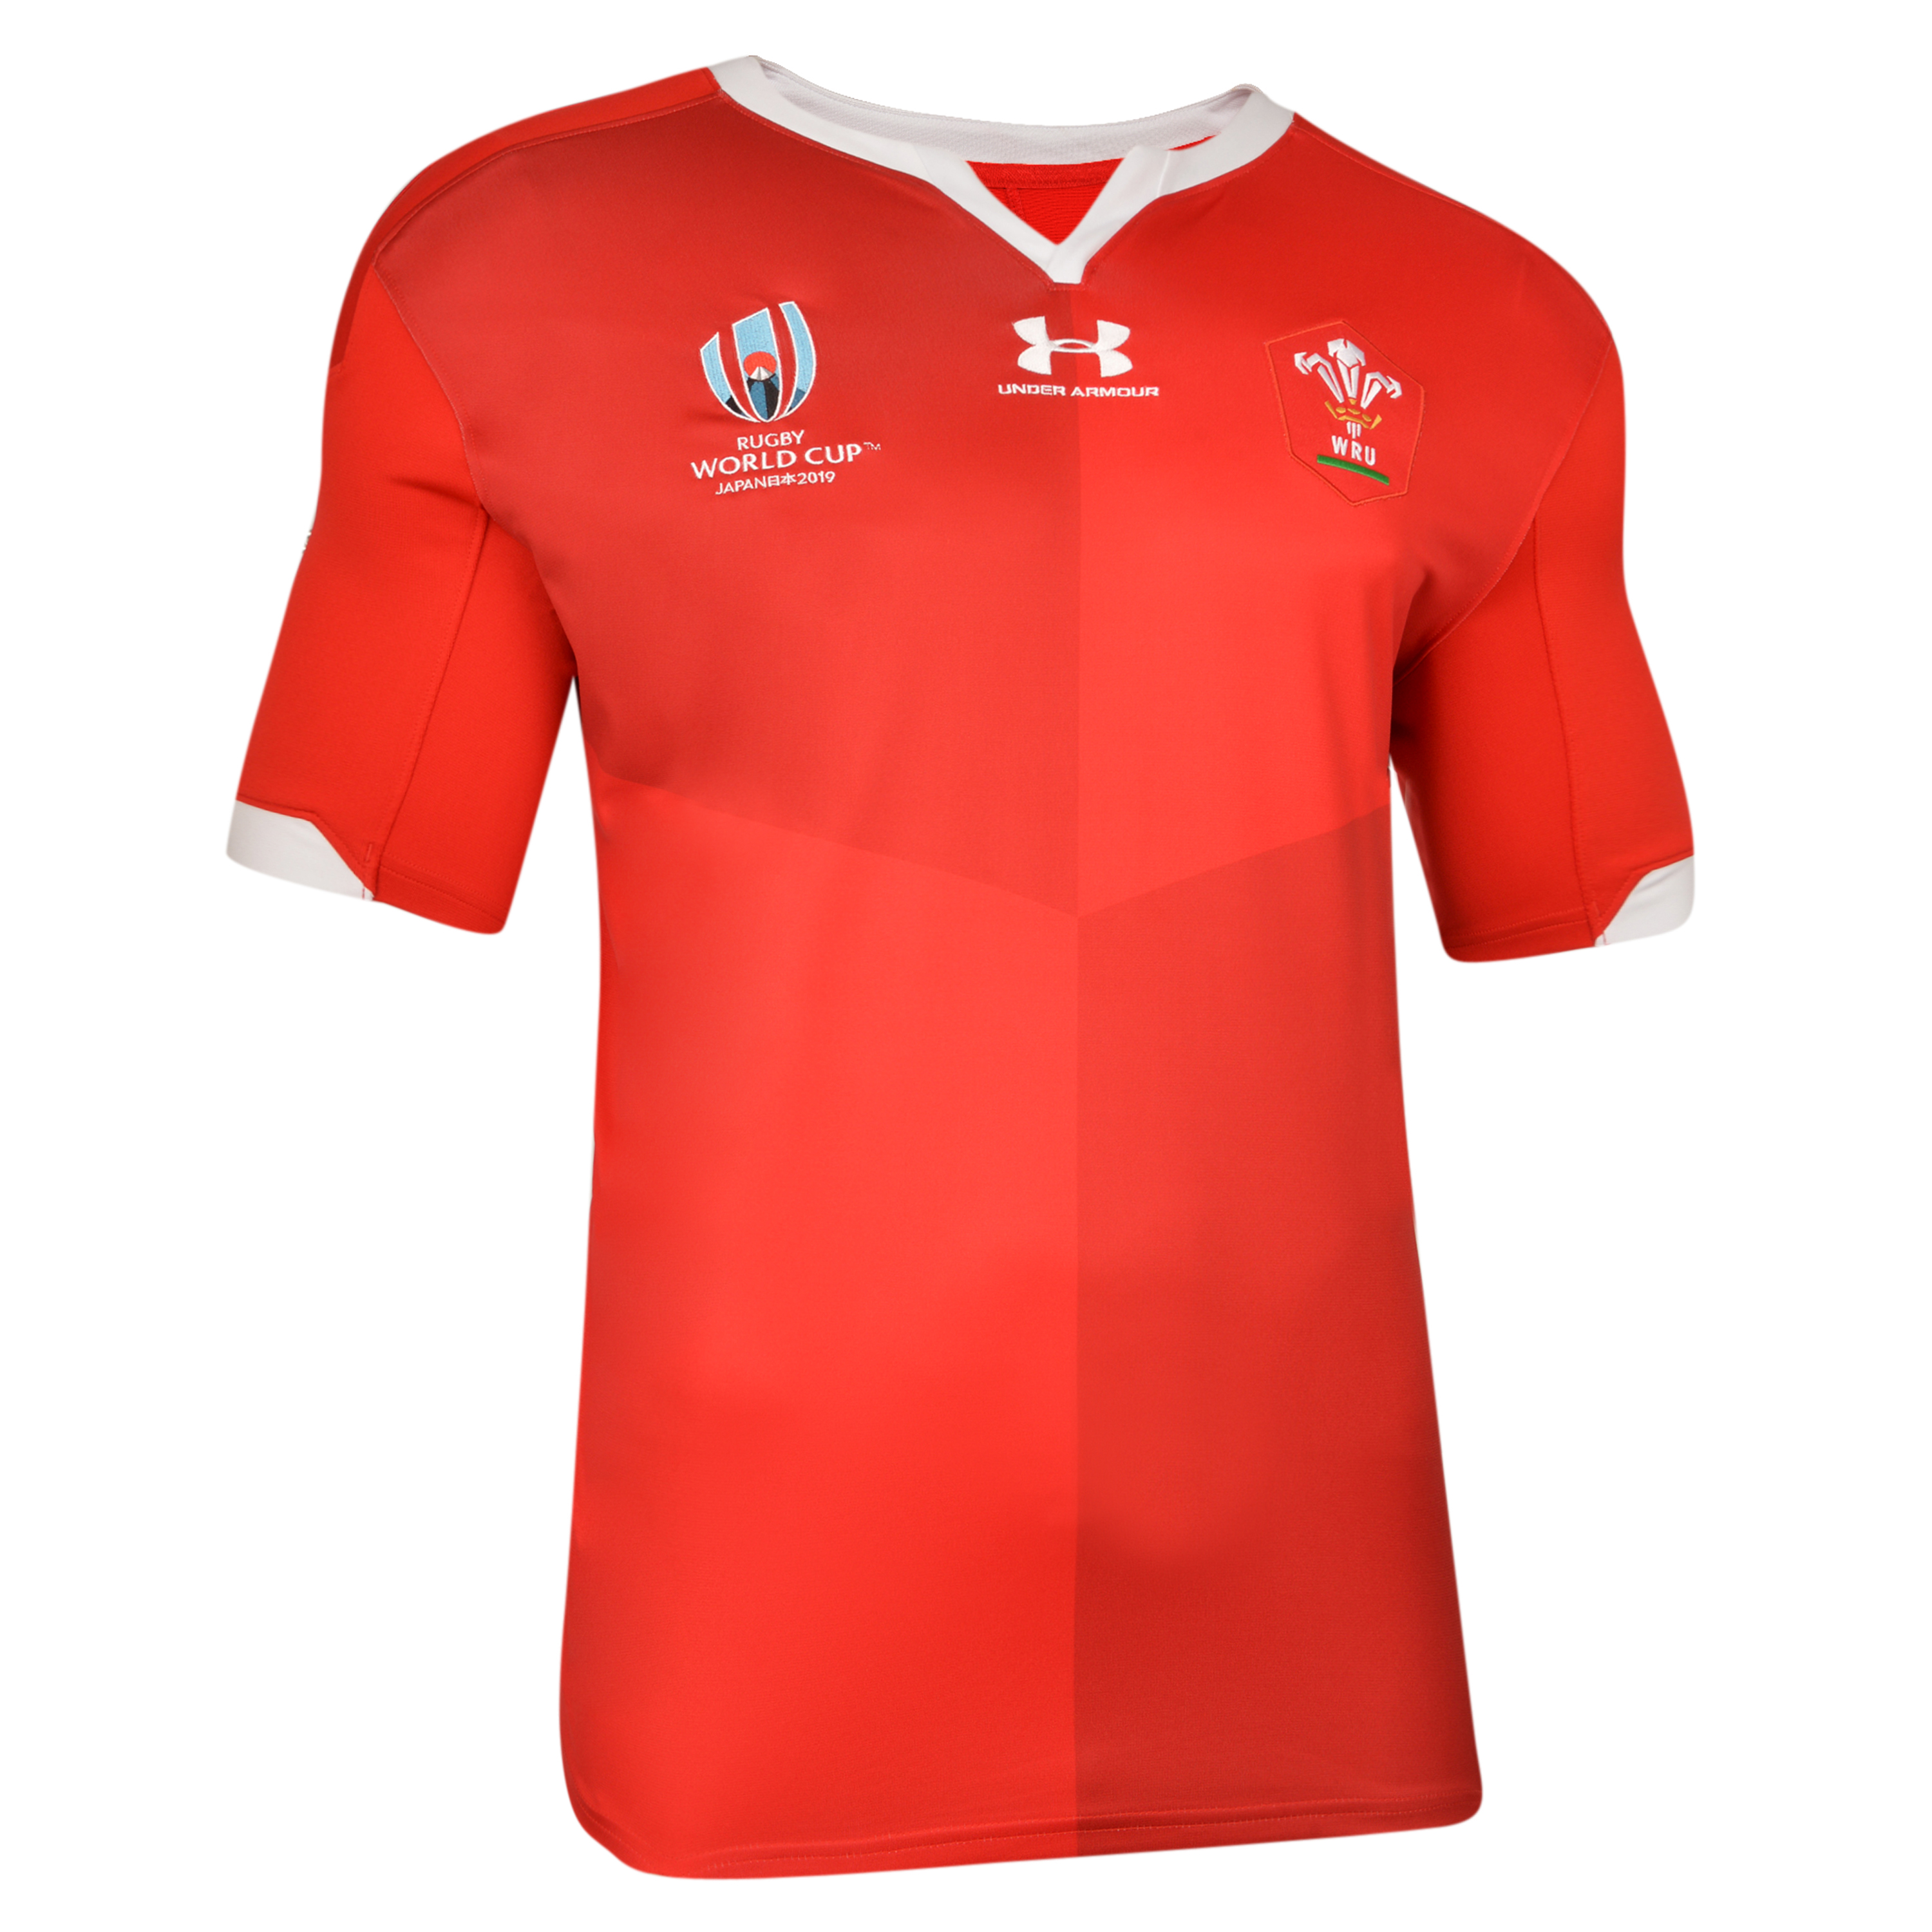 2019 rugby world cup shirts